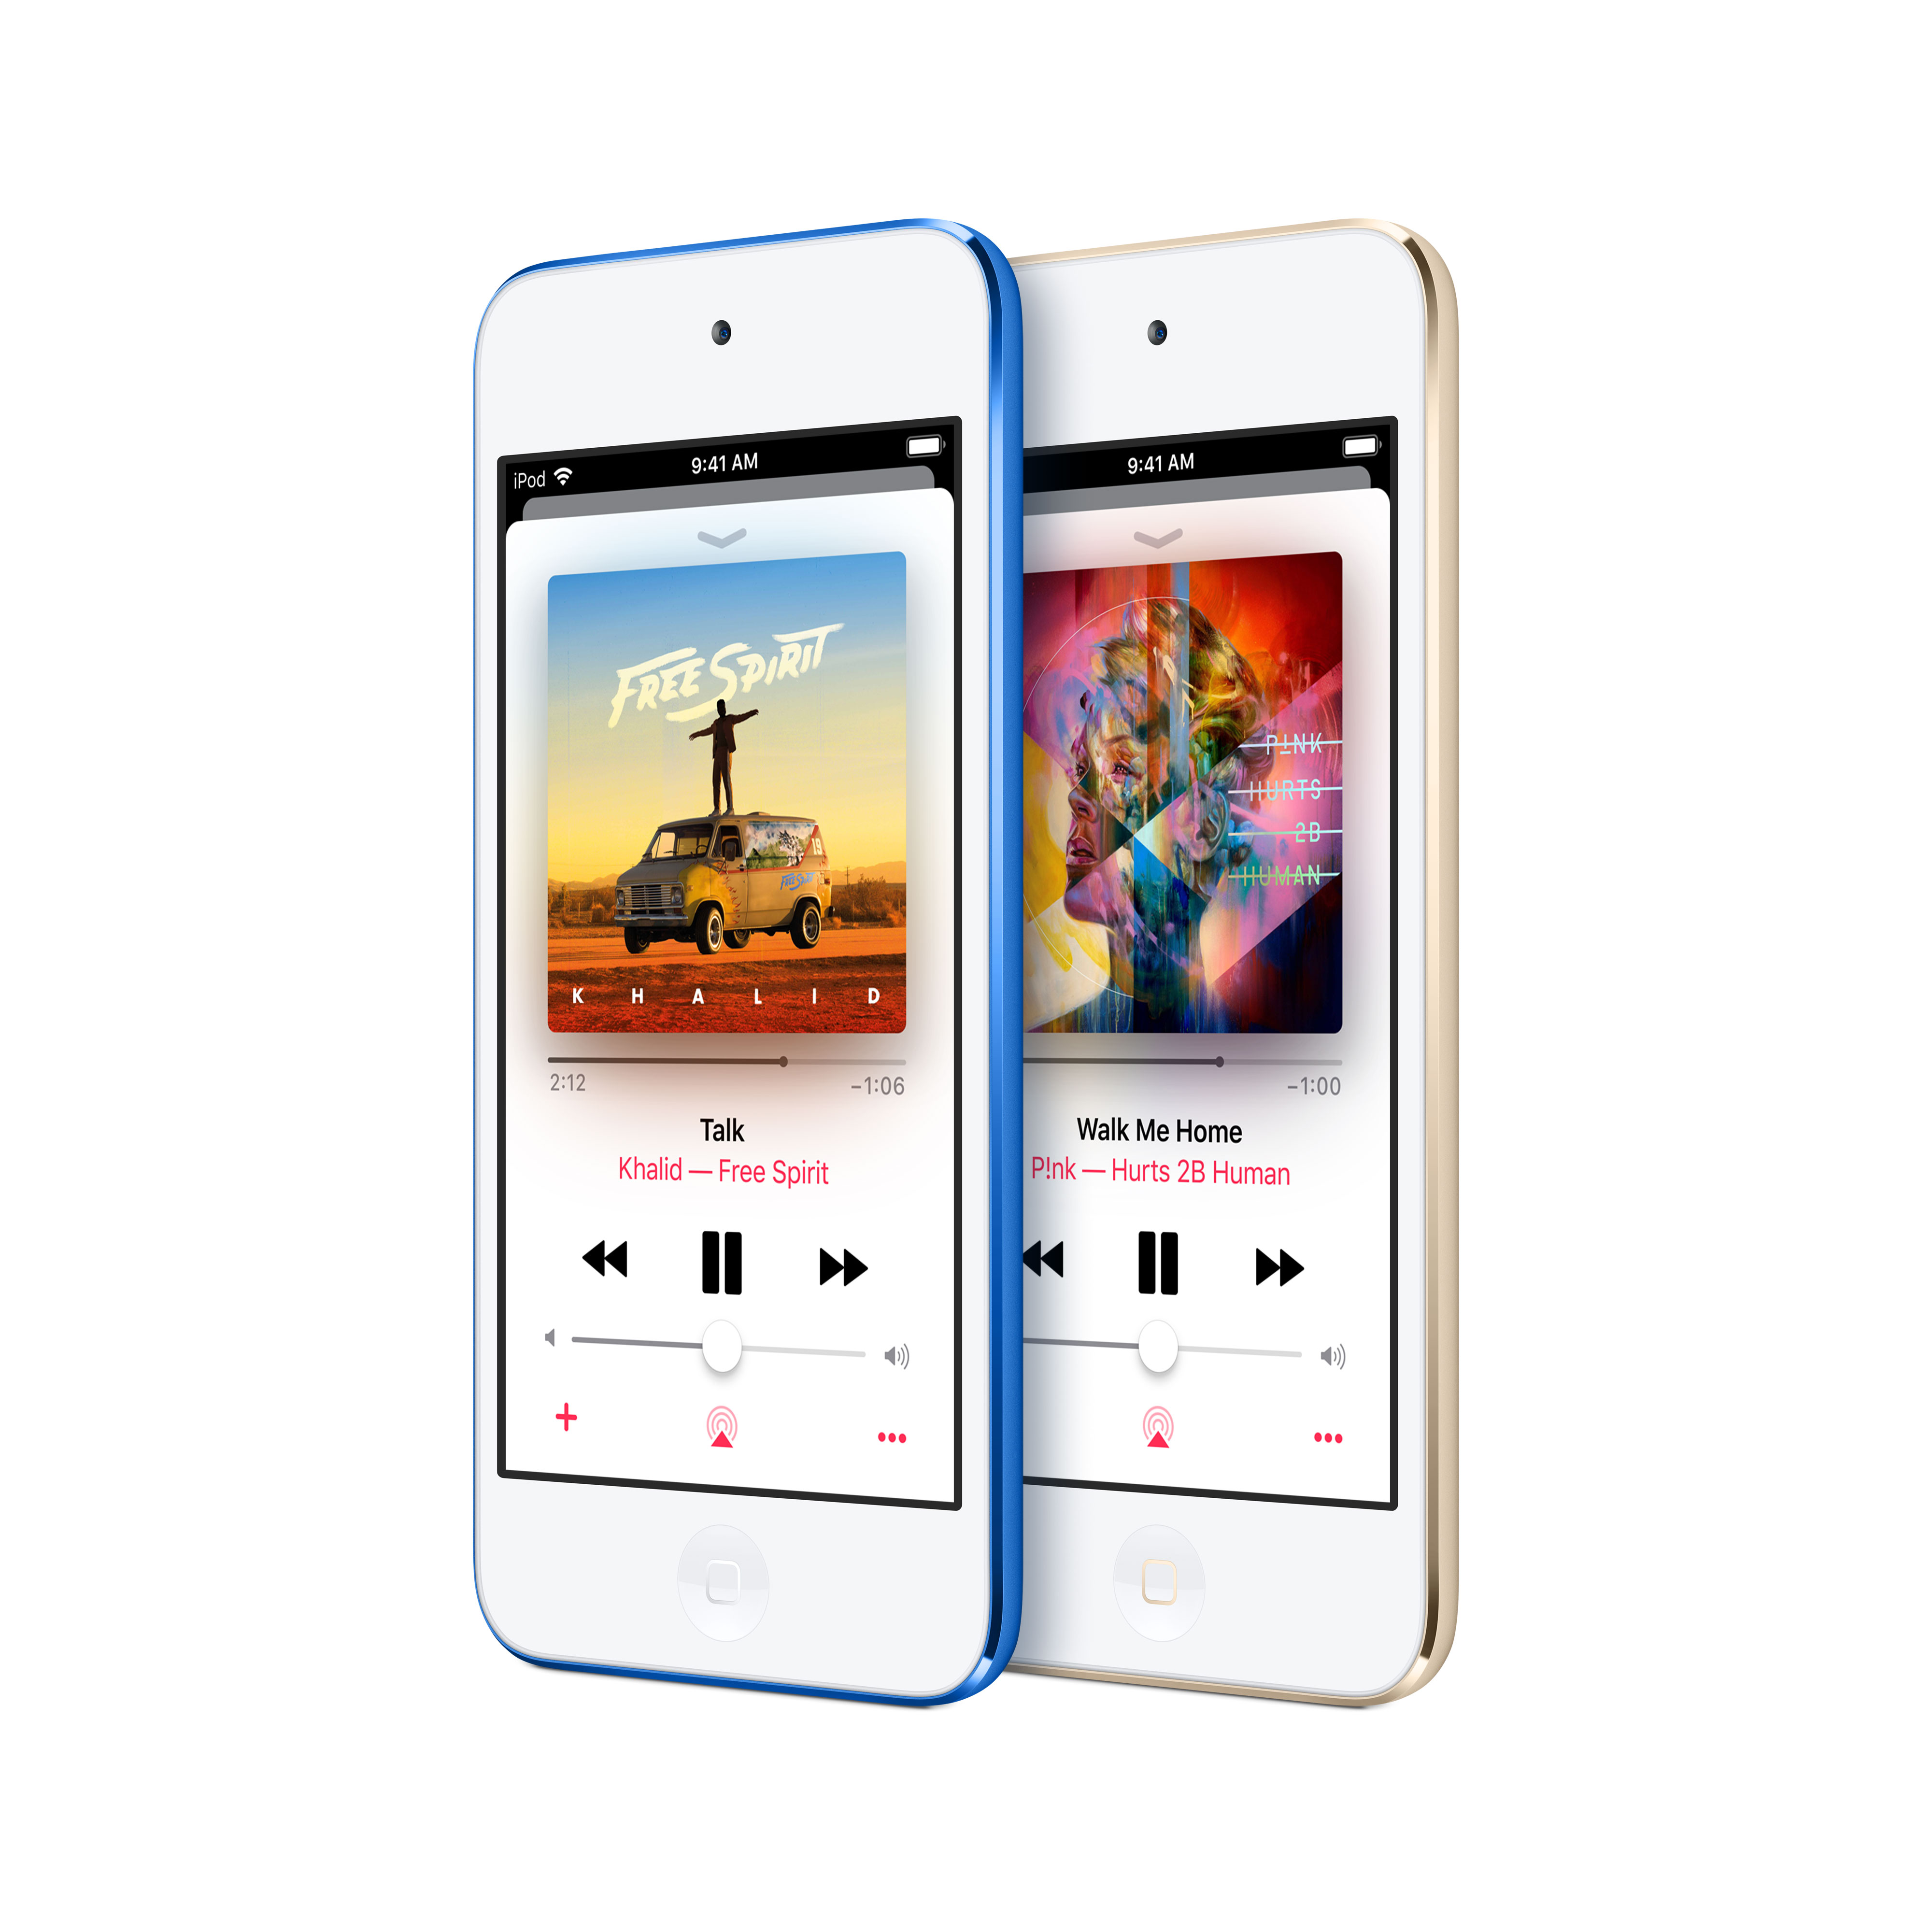 Restored Apple iPod touch 7th Generation 128GB - Blue (Refurbished) - image 2 of 6